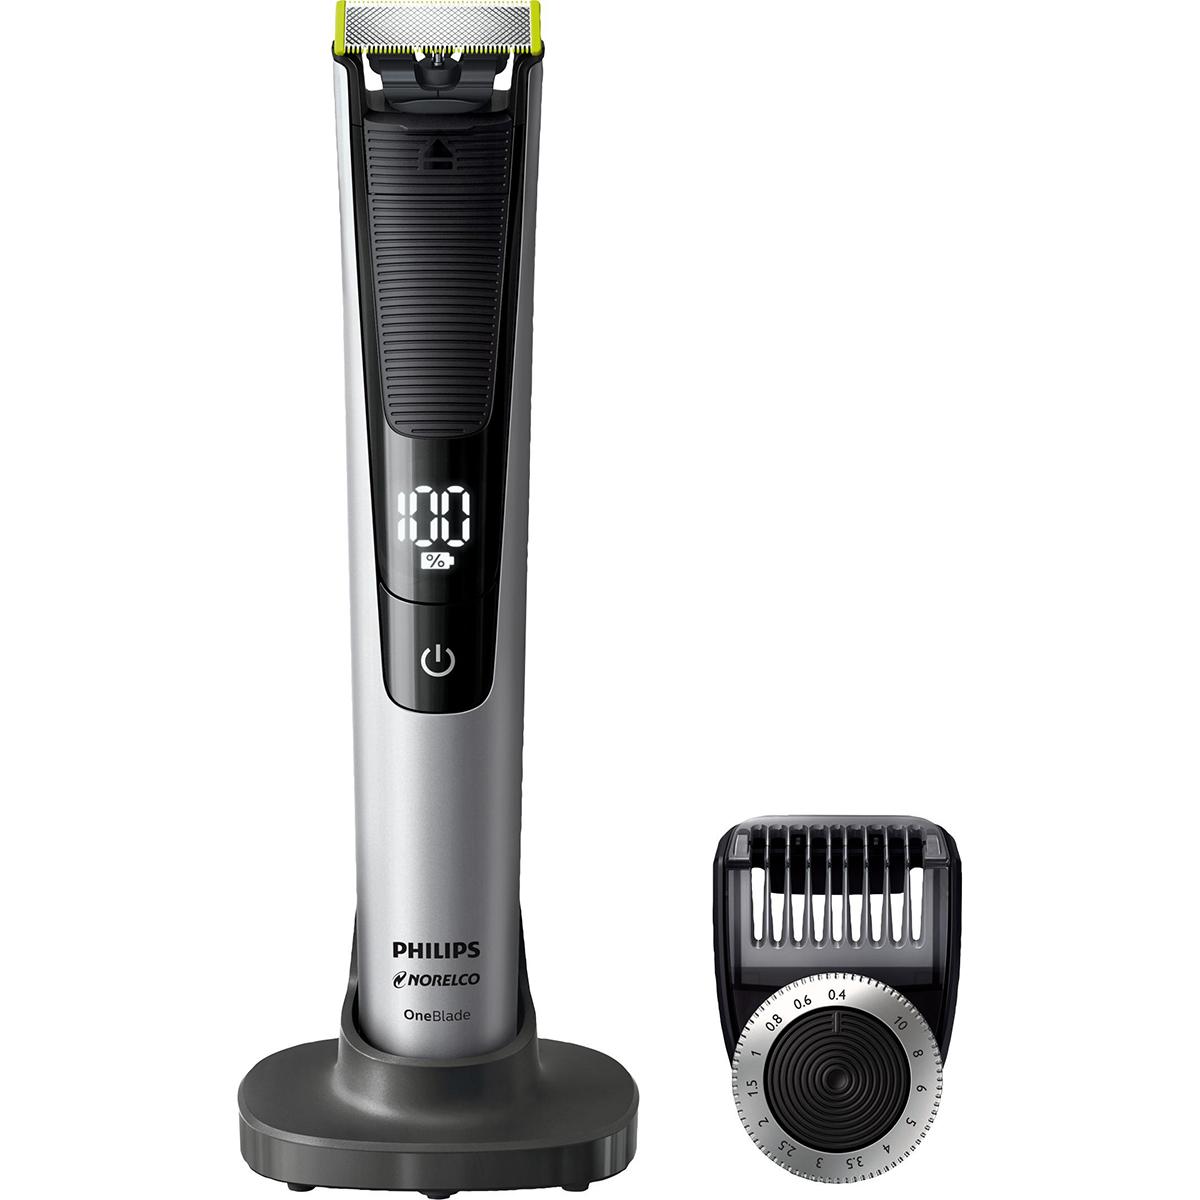 Philips Norelco OneBlade Pro Wet Dry Trimmer for $39.99 Shipped